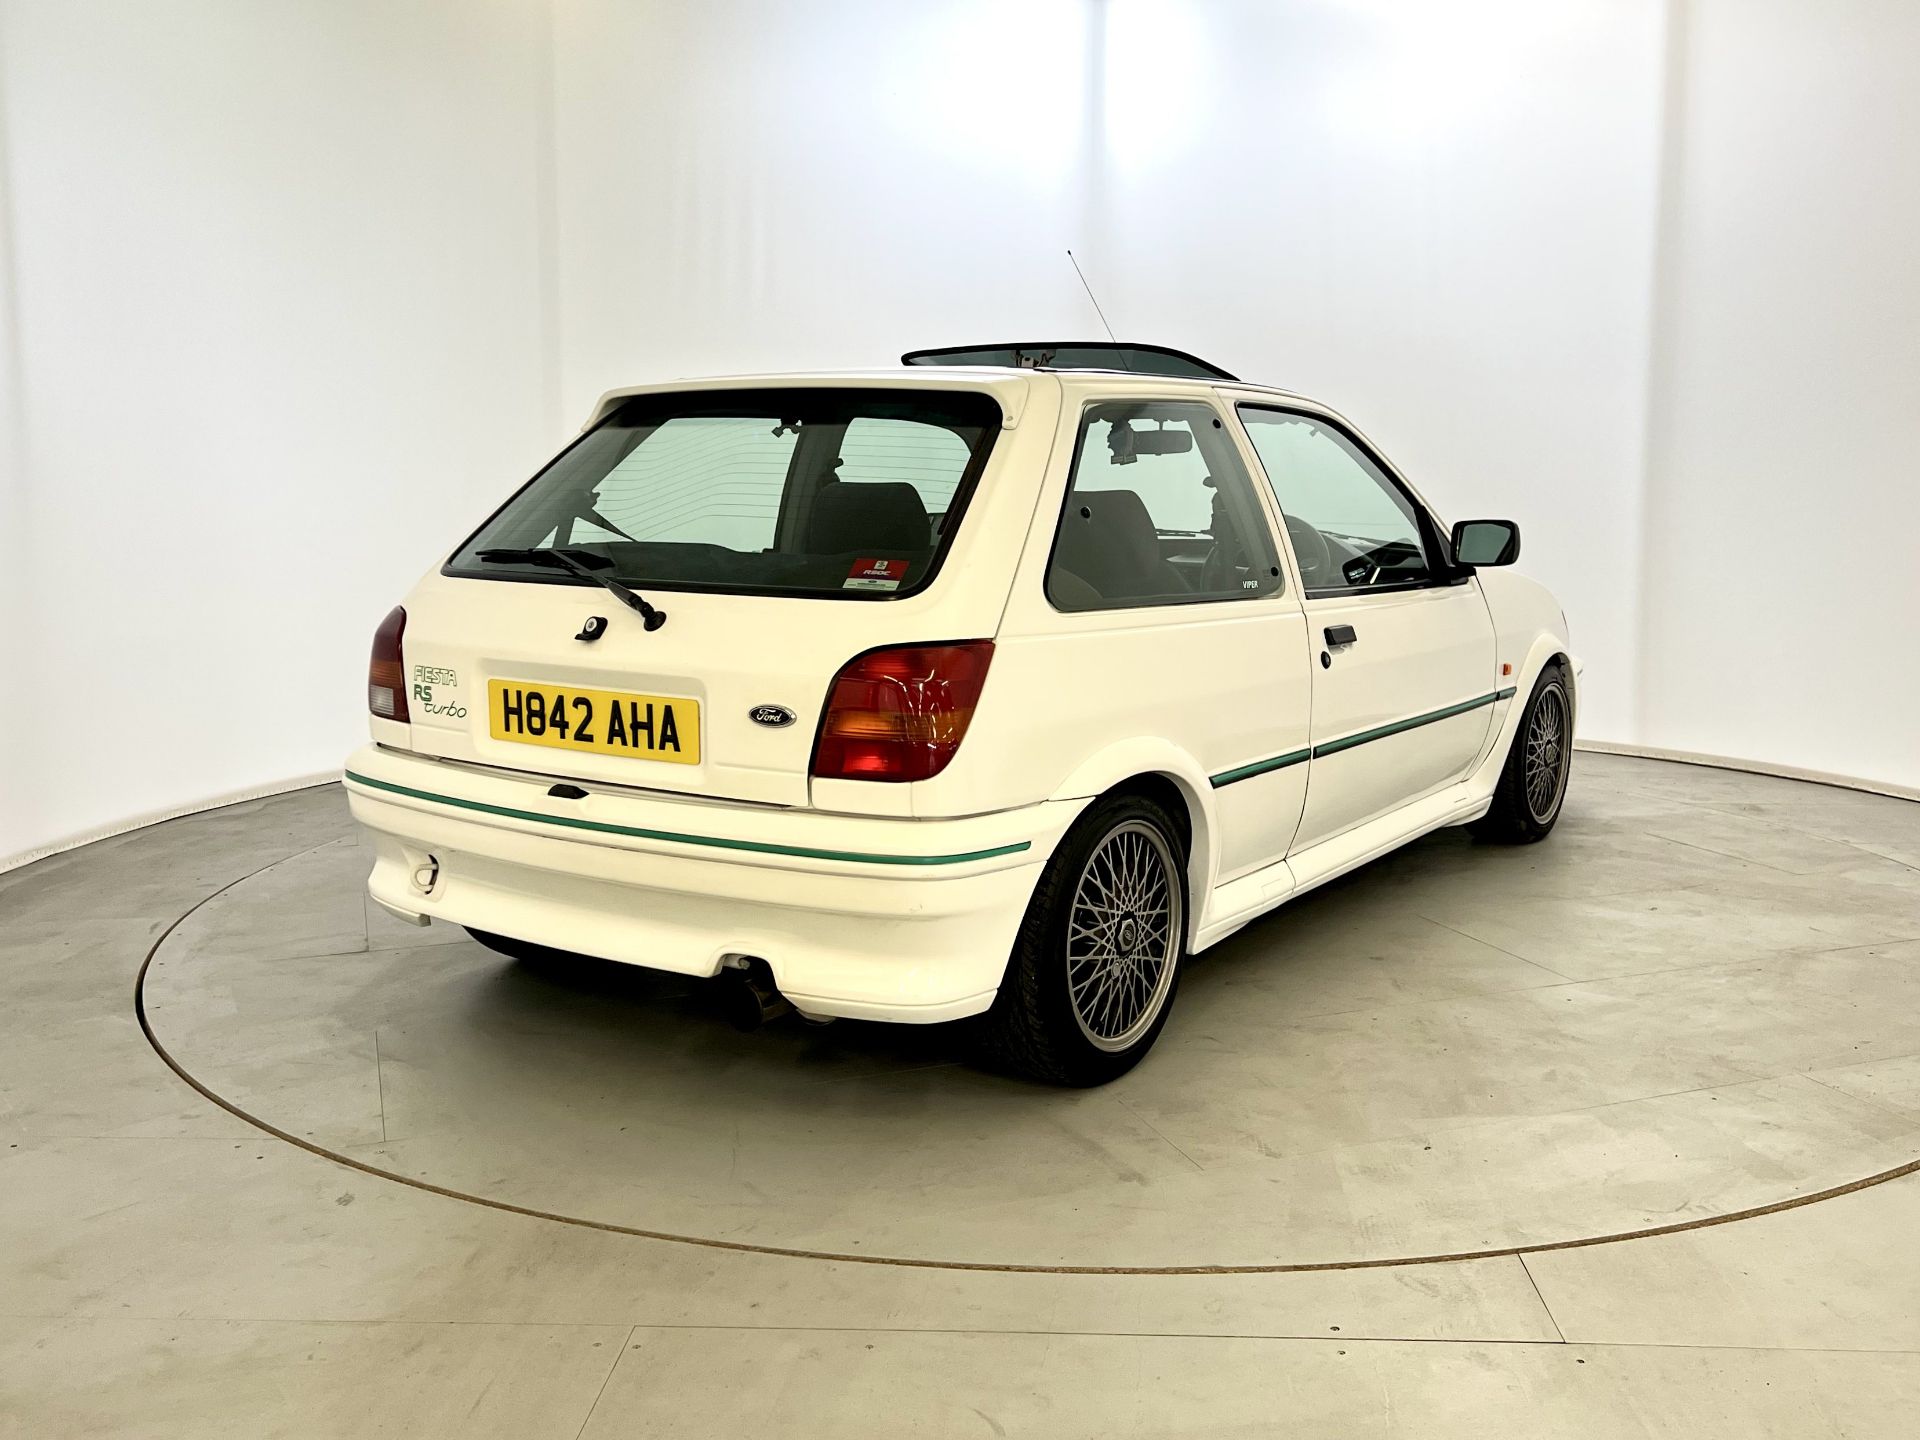 Ford Fiesta RS Turbo - Image 9 of 26